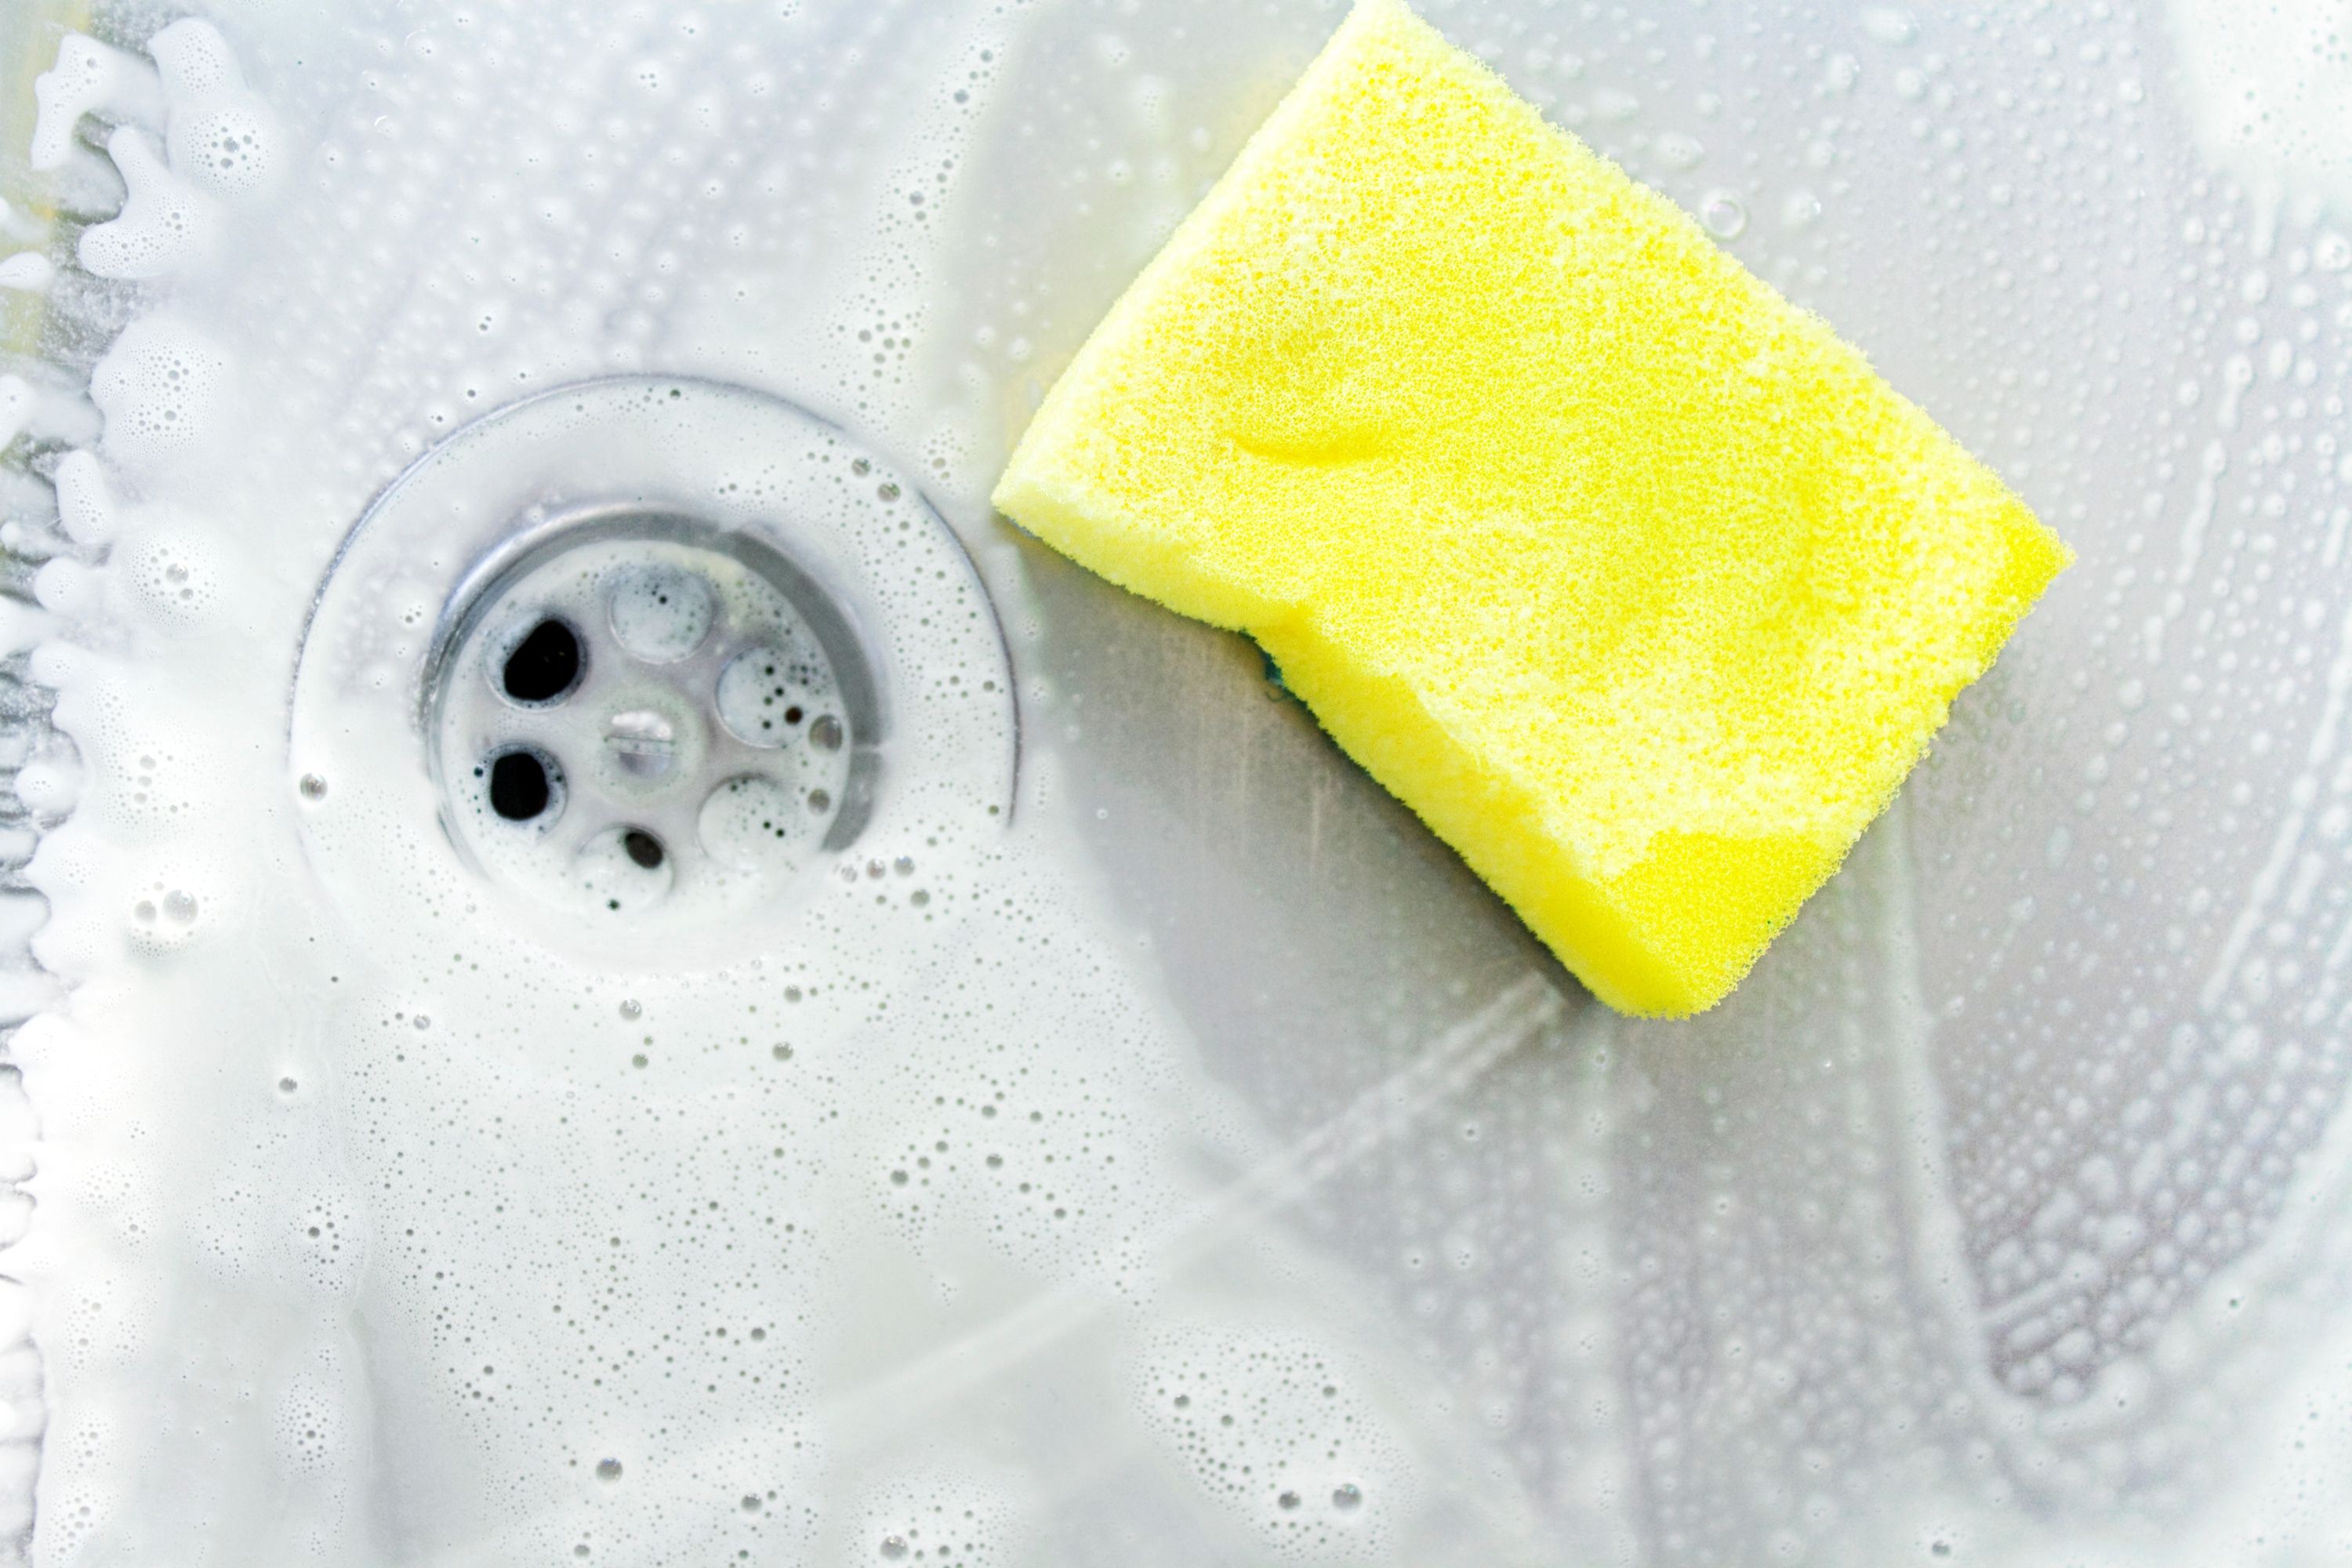 How To Clean A Sponge 3 Ways 